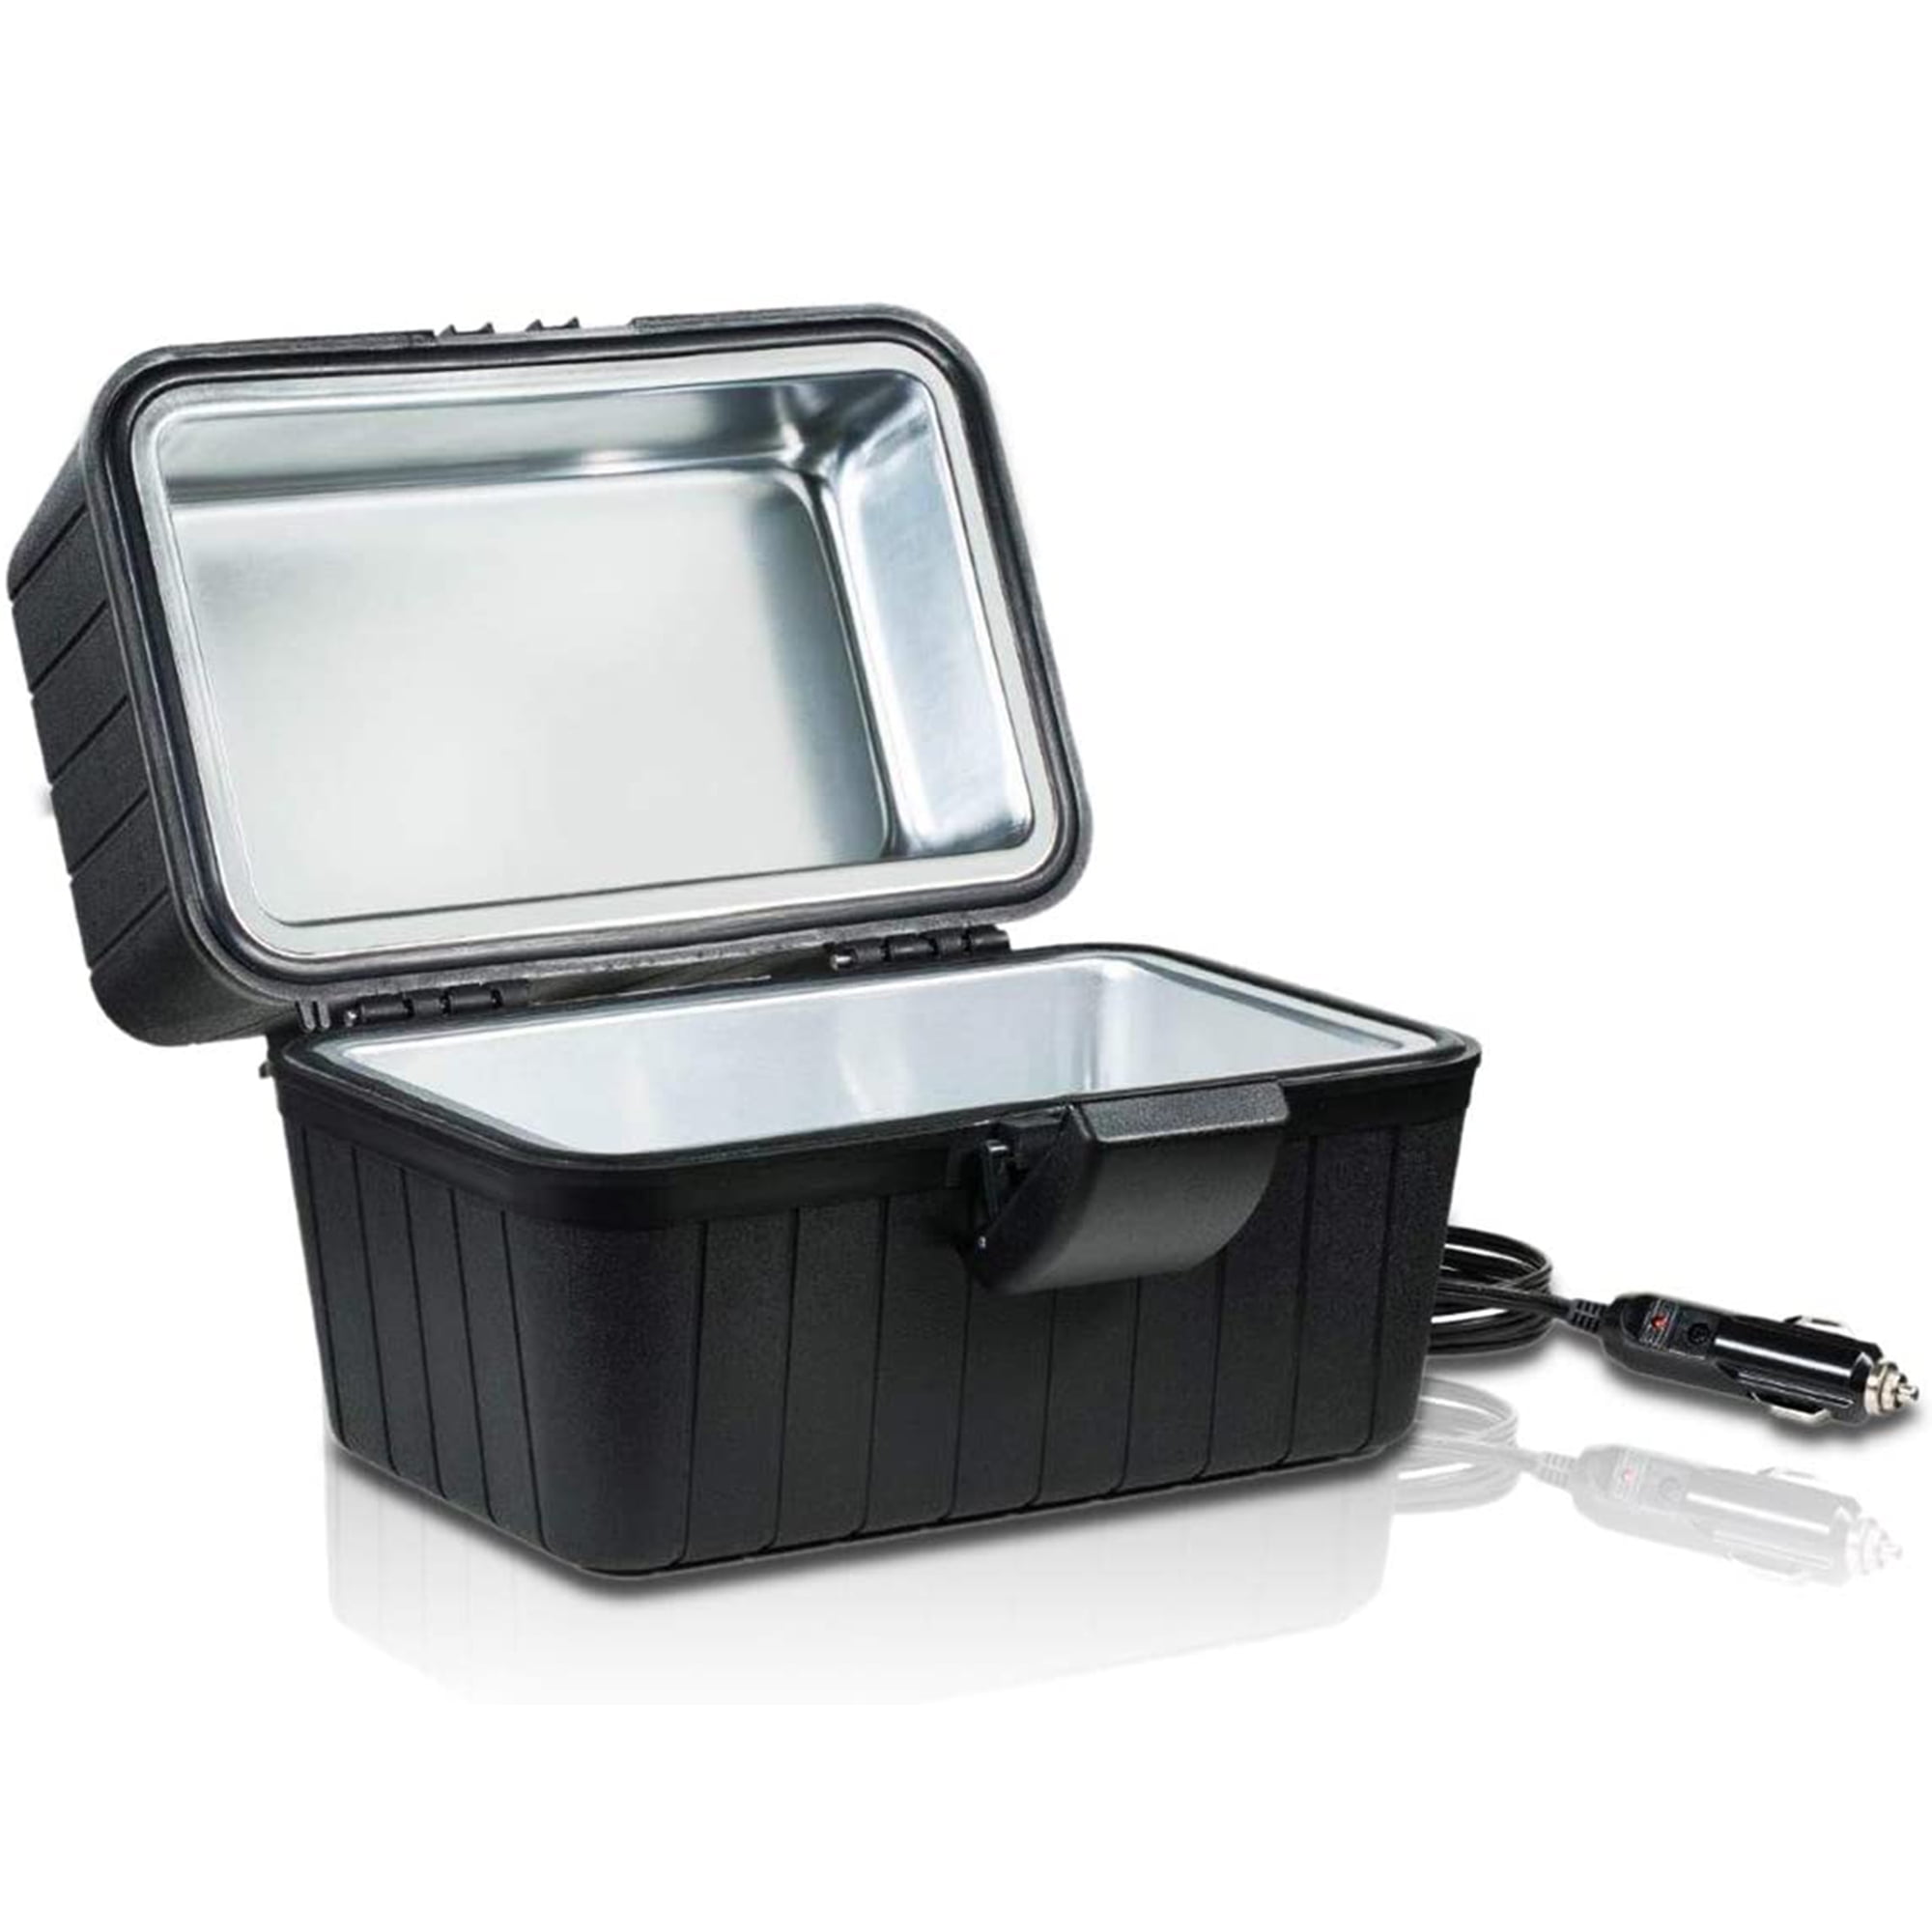 12V Portable  Electric Heated Outdoor Travel Car Food Warmer Heater Lunch Box 